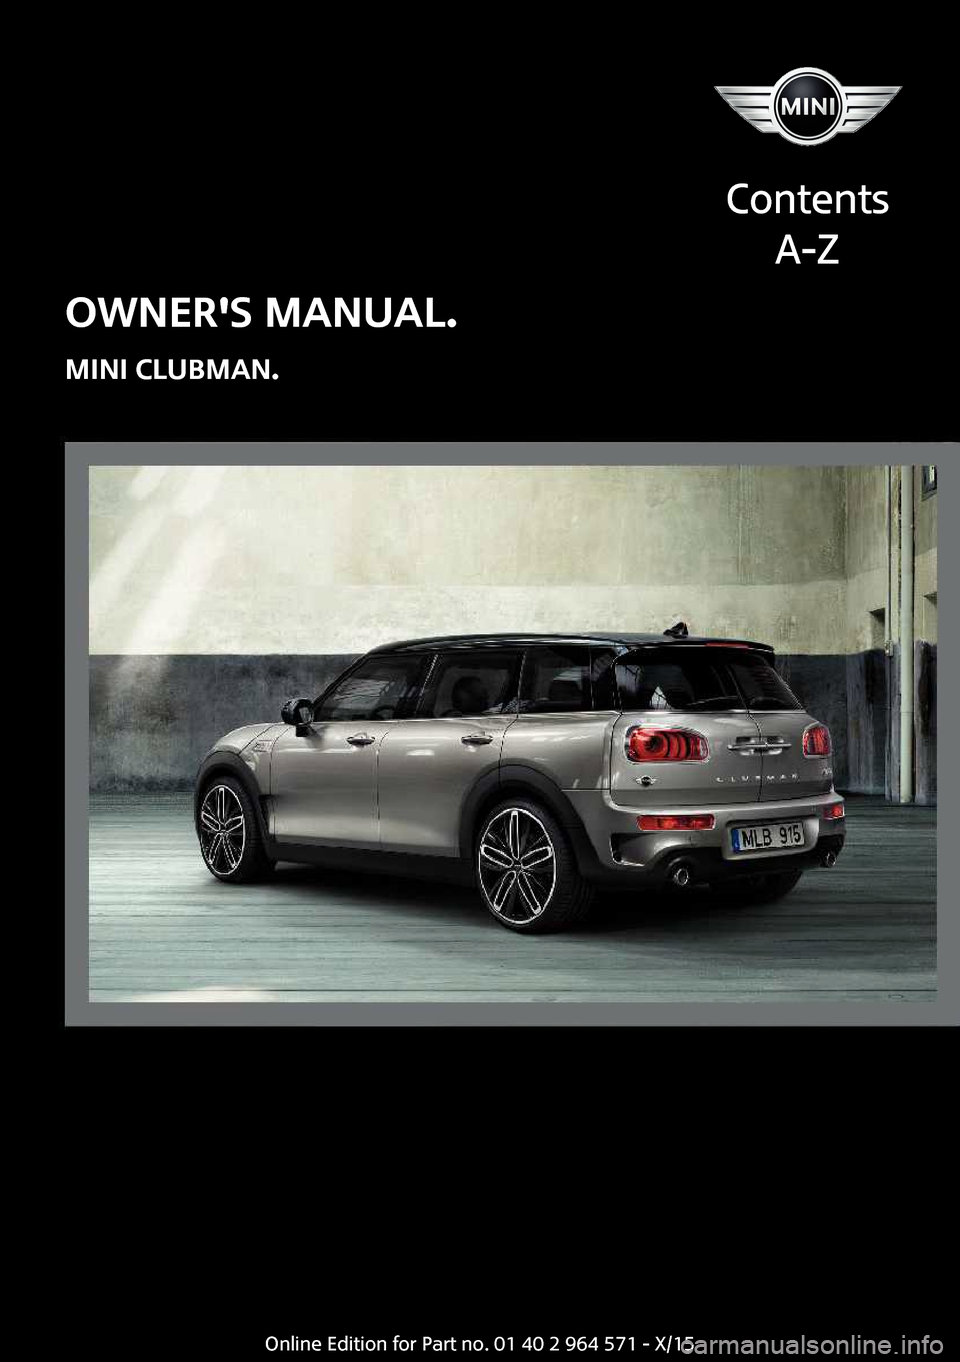 MINI Clubman 2016  Owners Manual (Mini Connected) OWNERS MANUAL.
MINI CLUBMAN.
Contents
A-Z
Online Edition for Part no. 01 40 2 964 571 - X/15 